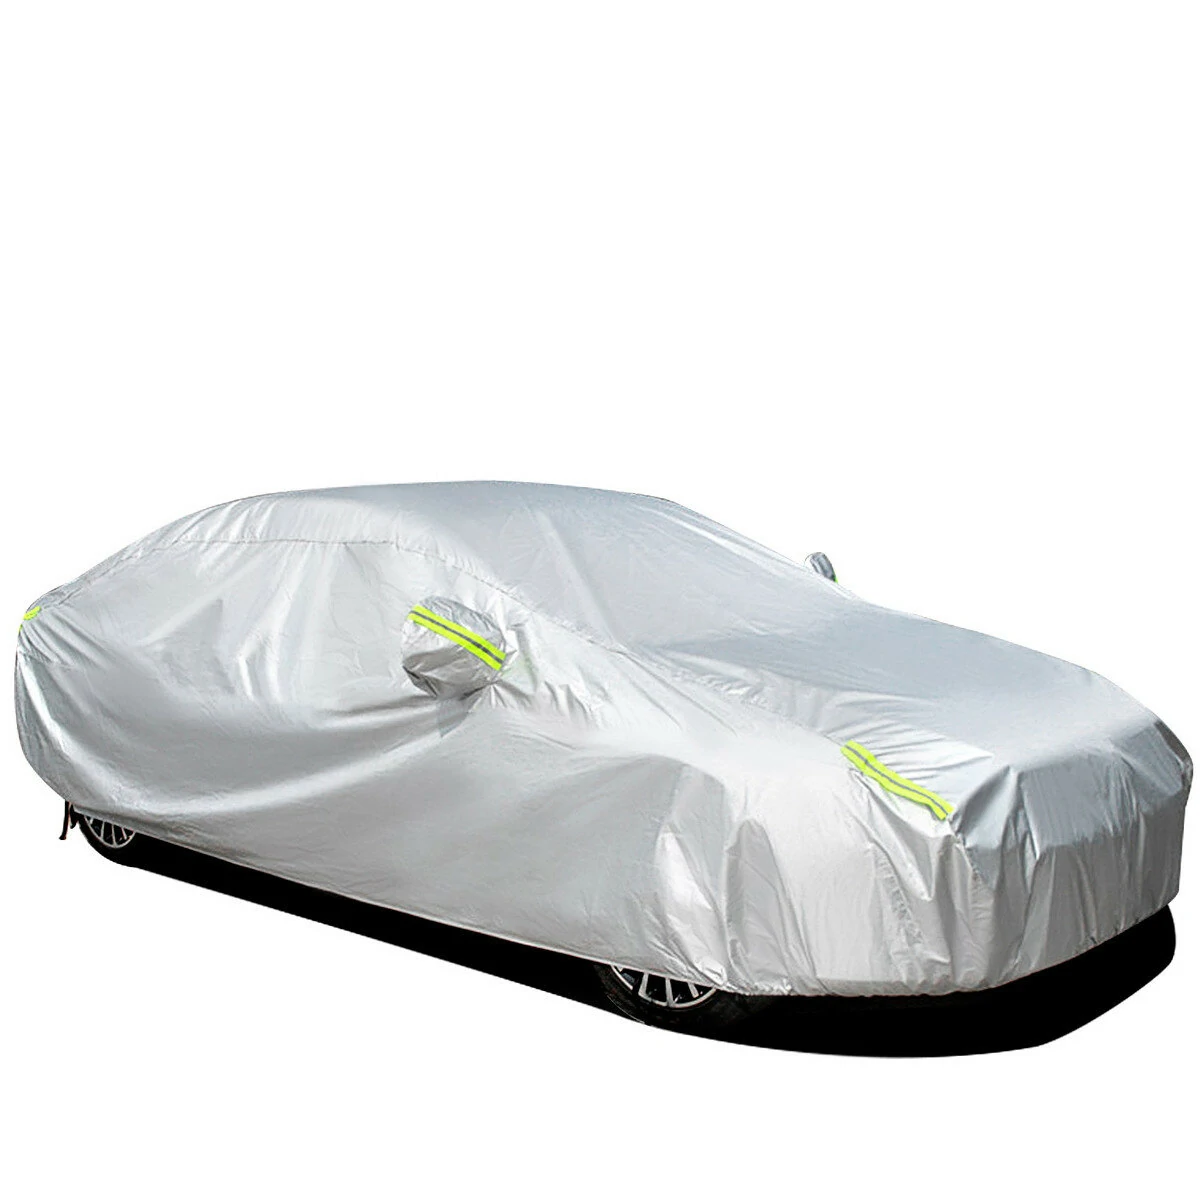 190T Car Cover Indoor Outdoor Snow Sun UV Snow Dust Resistant Protection Universal